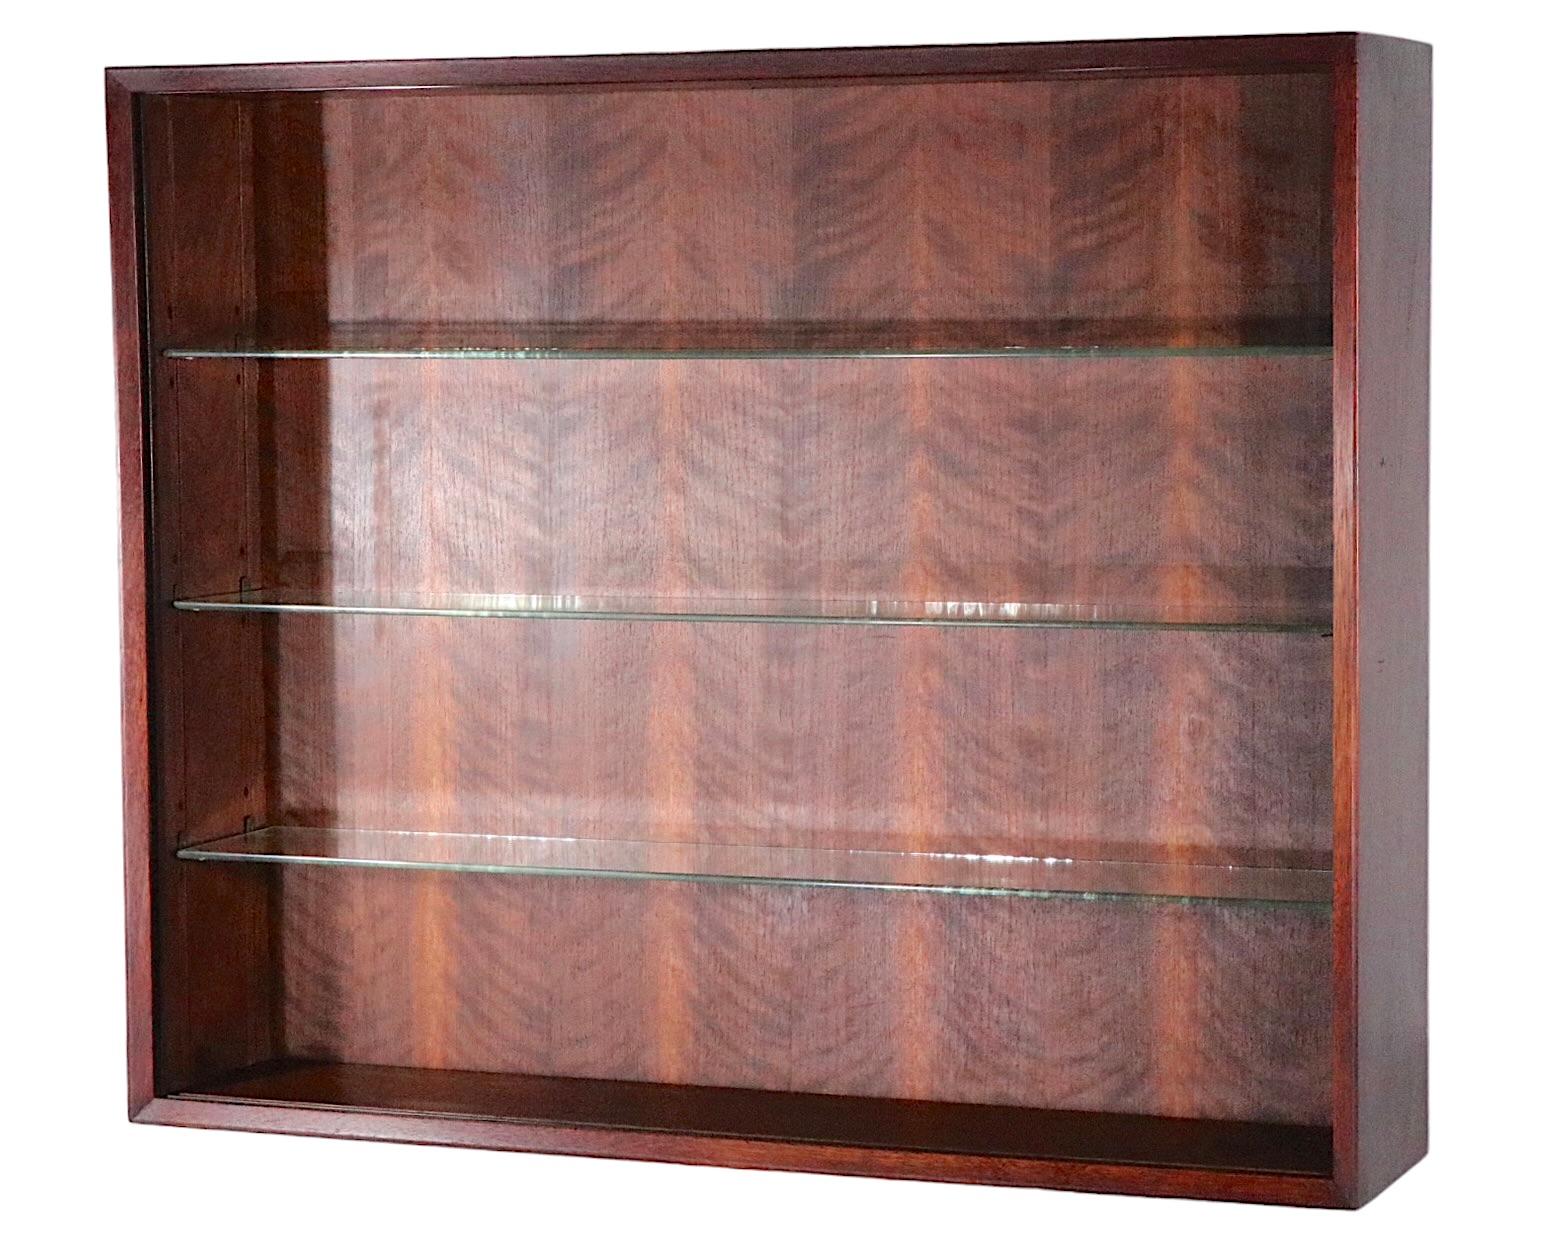 Danish Mid Century Wall Hanging Cabinet with Sliding Mirrored Doors, circa 1950s For Sale 3